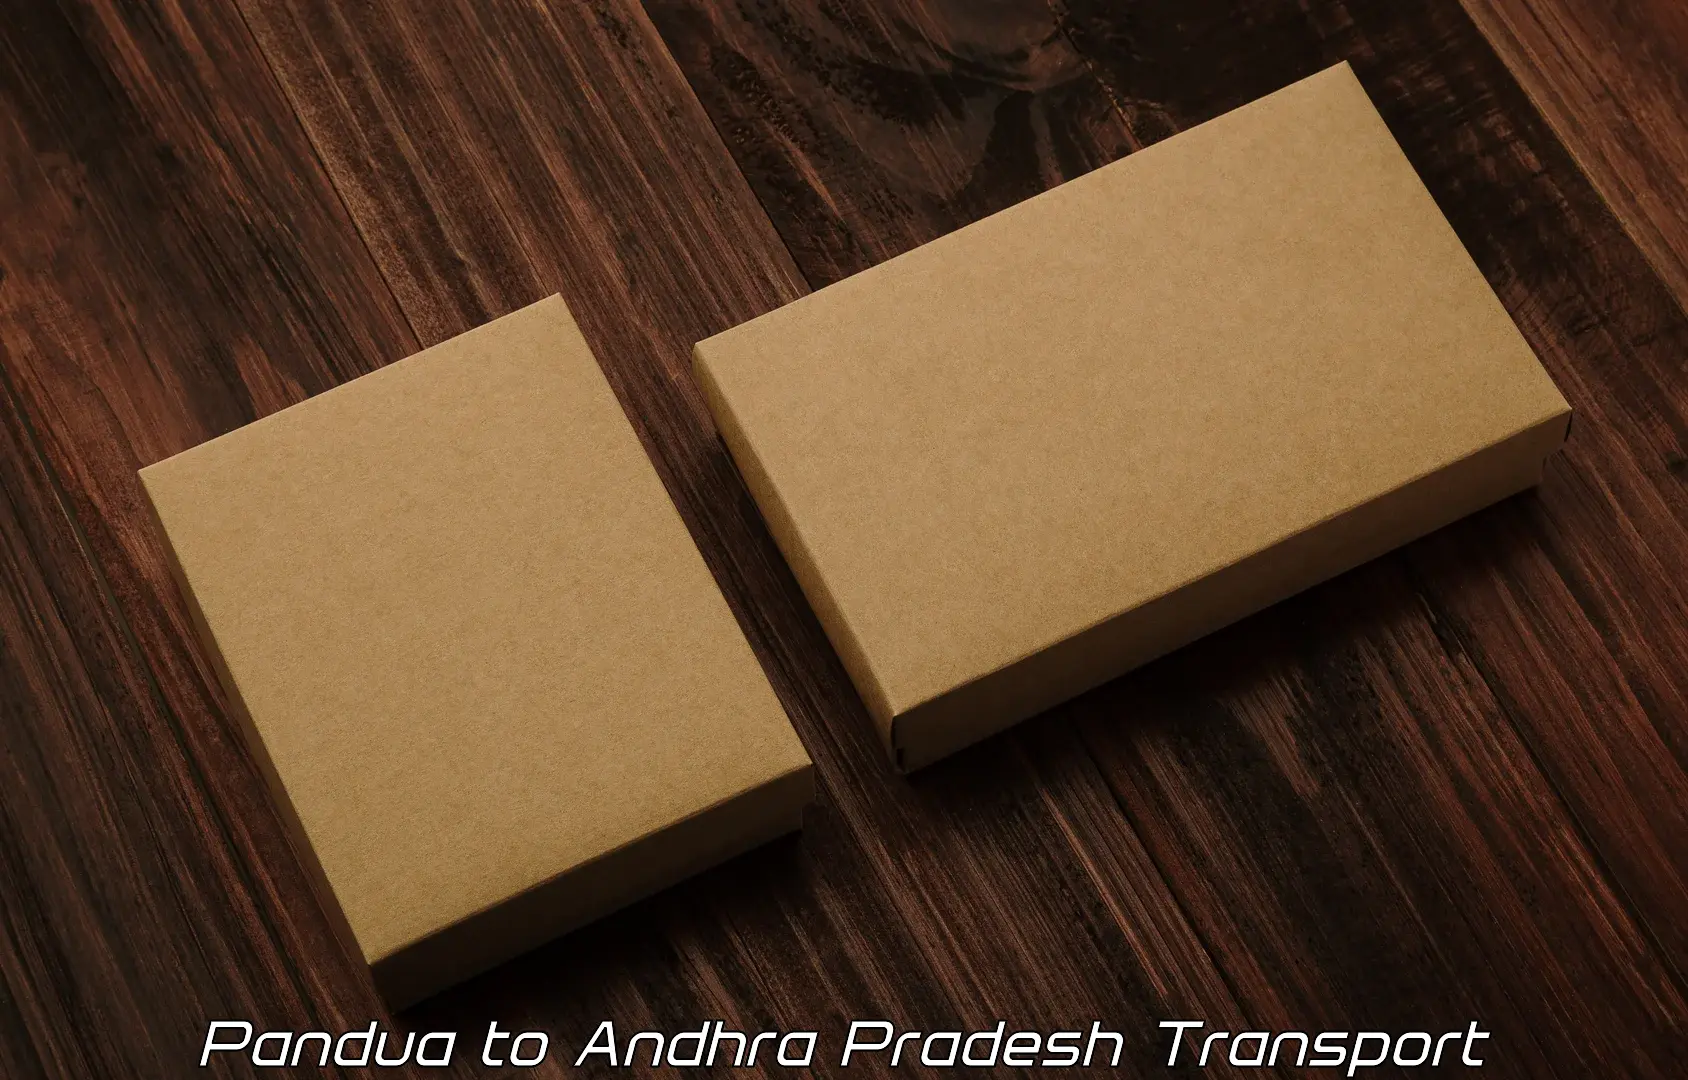 Package delivery services in Pandua to Nellore